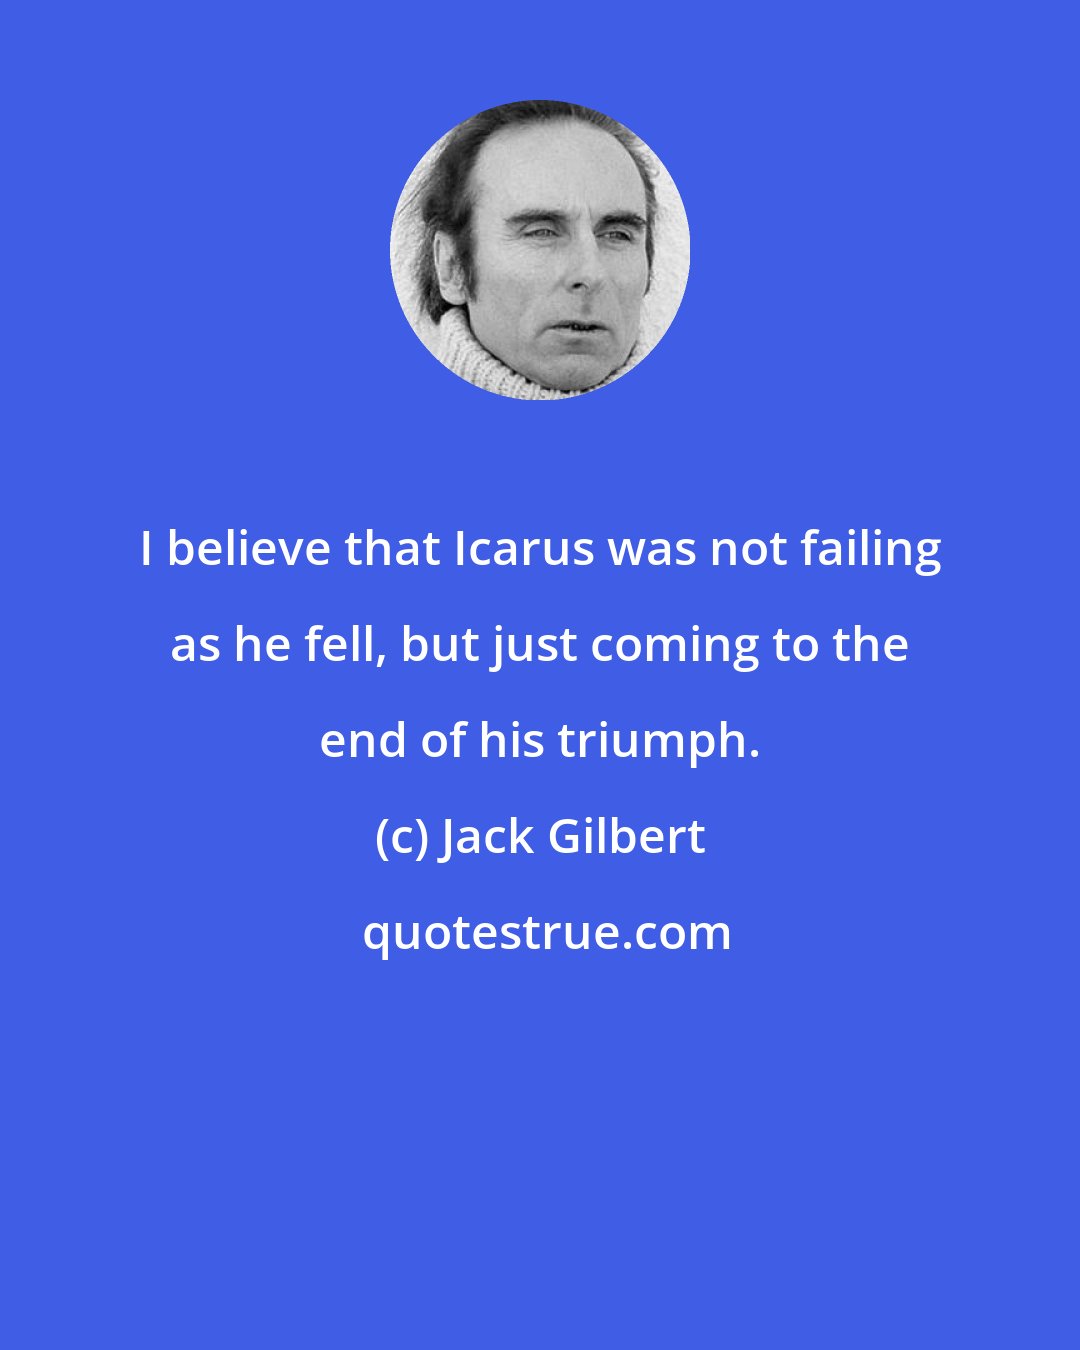 Jack Gilbert: I believe that Icarus was not failing as he fell, but just coming to the end of his triumph.